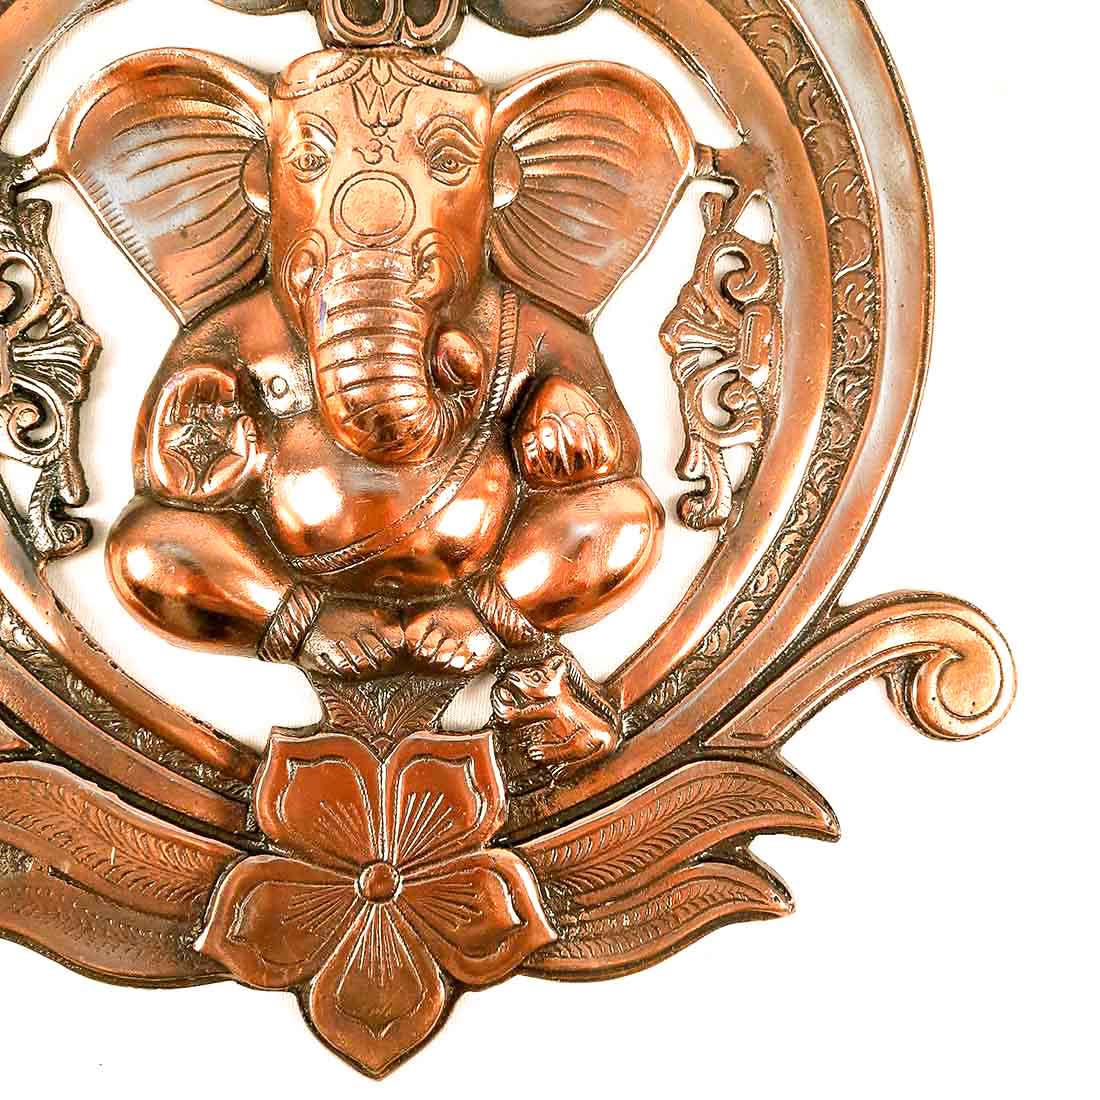 Ganesh Wall Hanging Murti | Ganesha With Om Wall Idol Decor - for Entrance Door | Ganesha Statue Hangings - for Home, Puja, Temple, Religious Decor & Gift -16 Inch